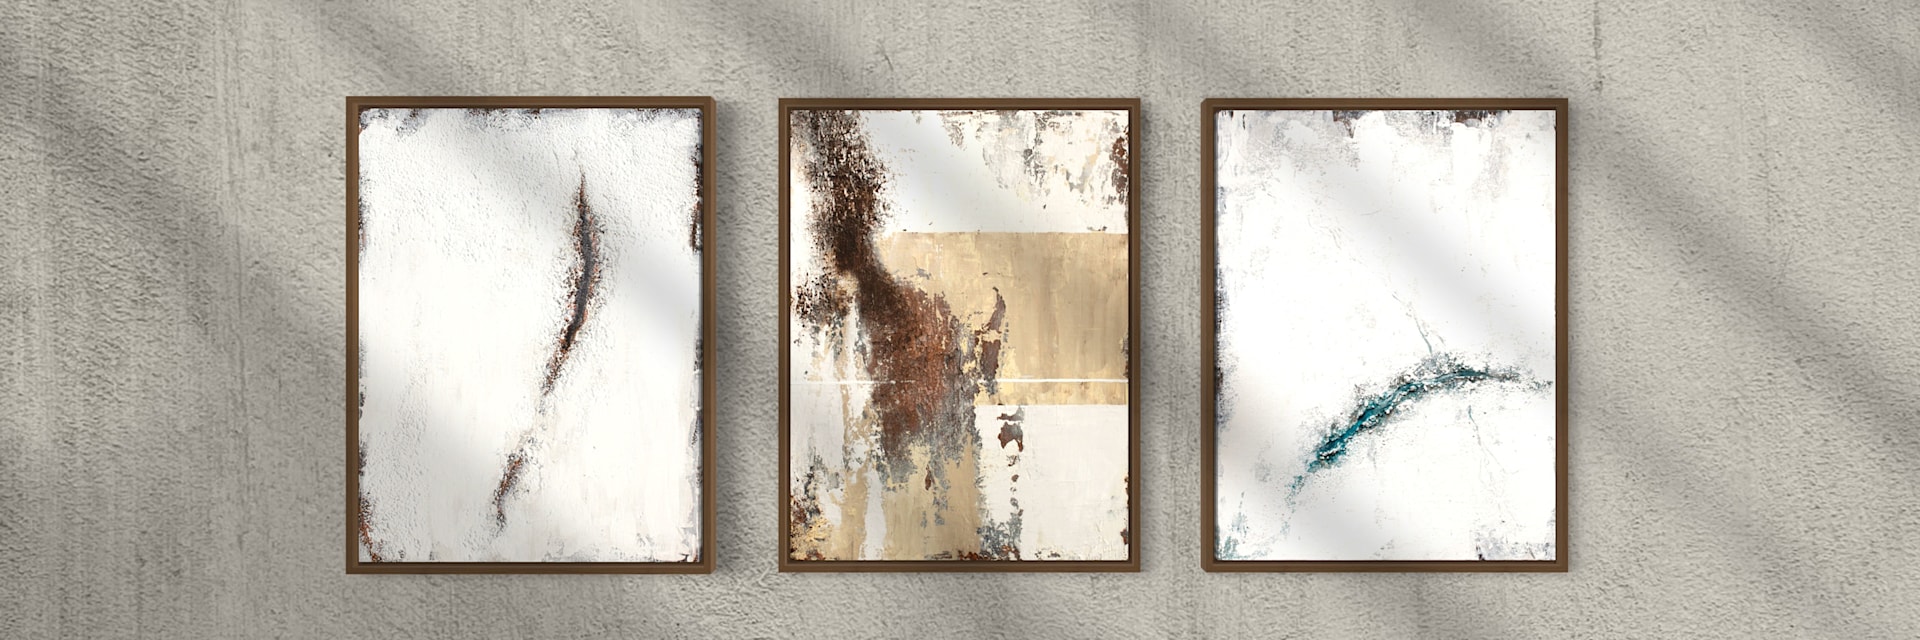 
        <div class='title'>
          3 abstract paintings on a wall
        </div>
       
        <div class='description'>
          
        </div>
      